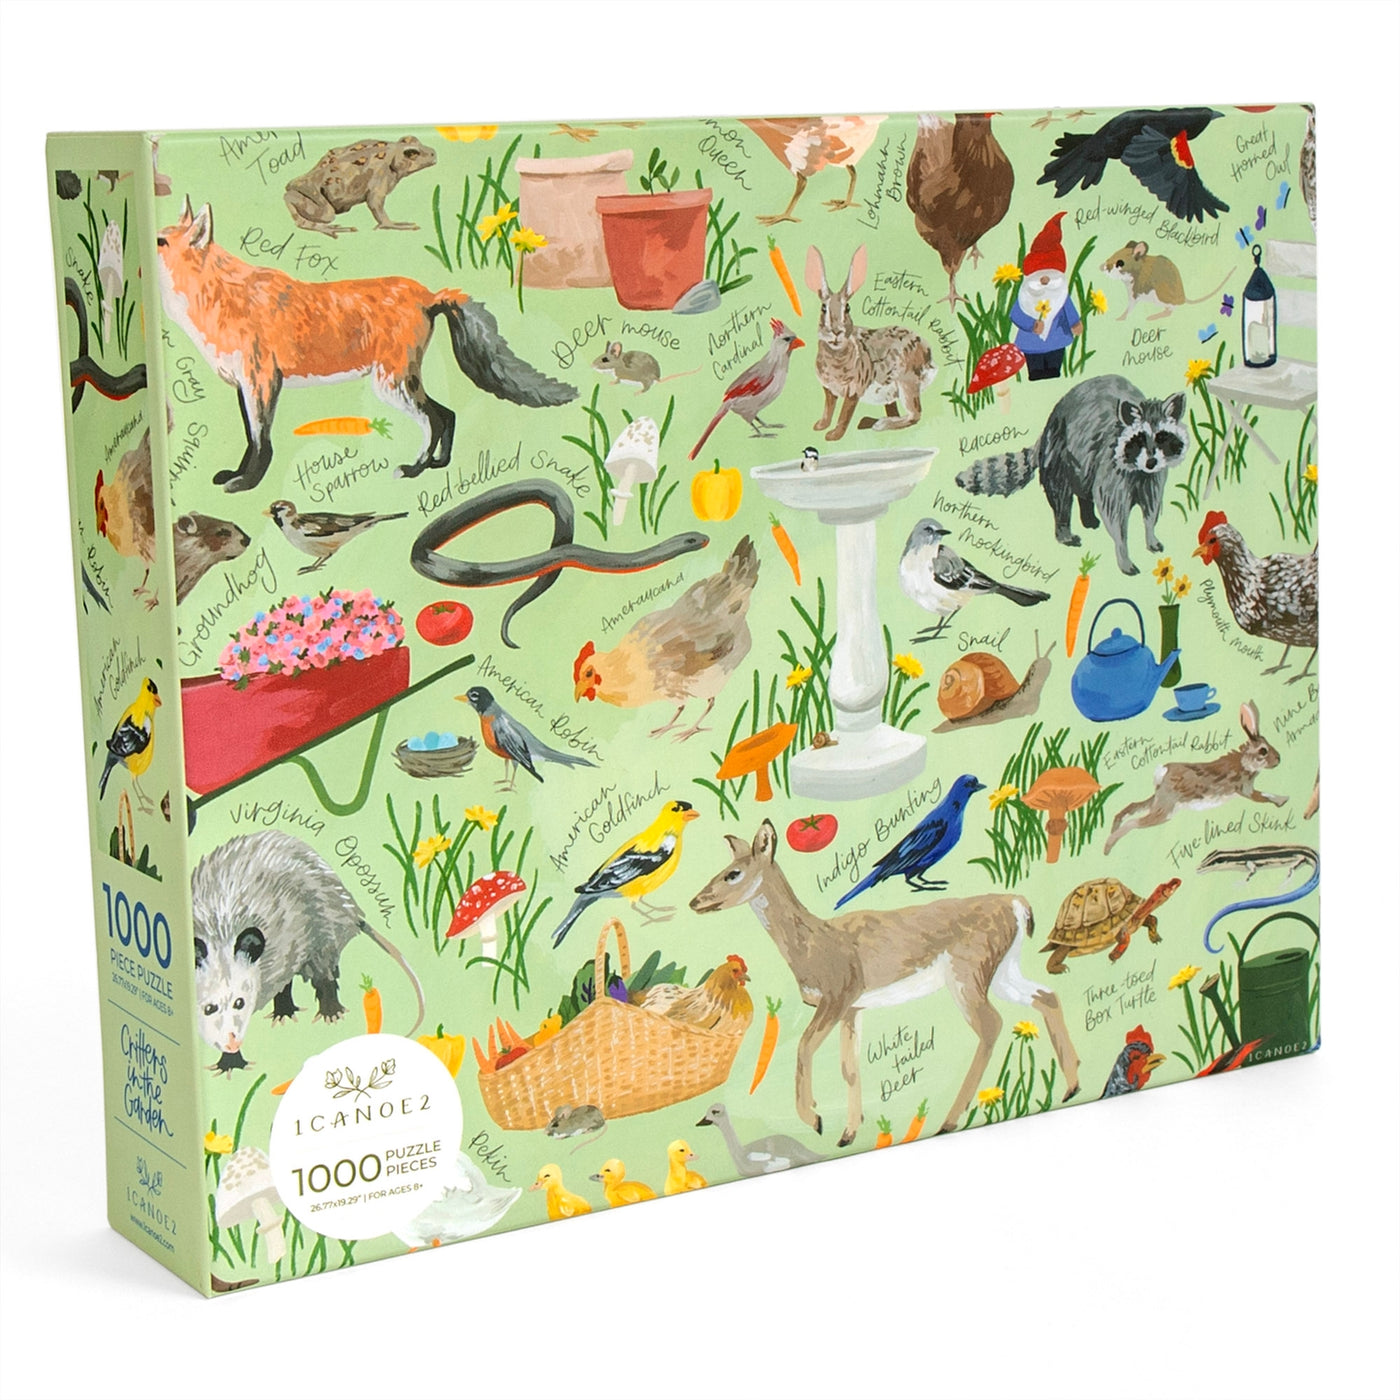 Critters in the Garden | 1,000 Piece Jigsaw Puzzle